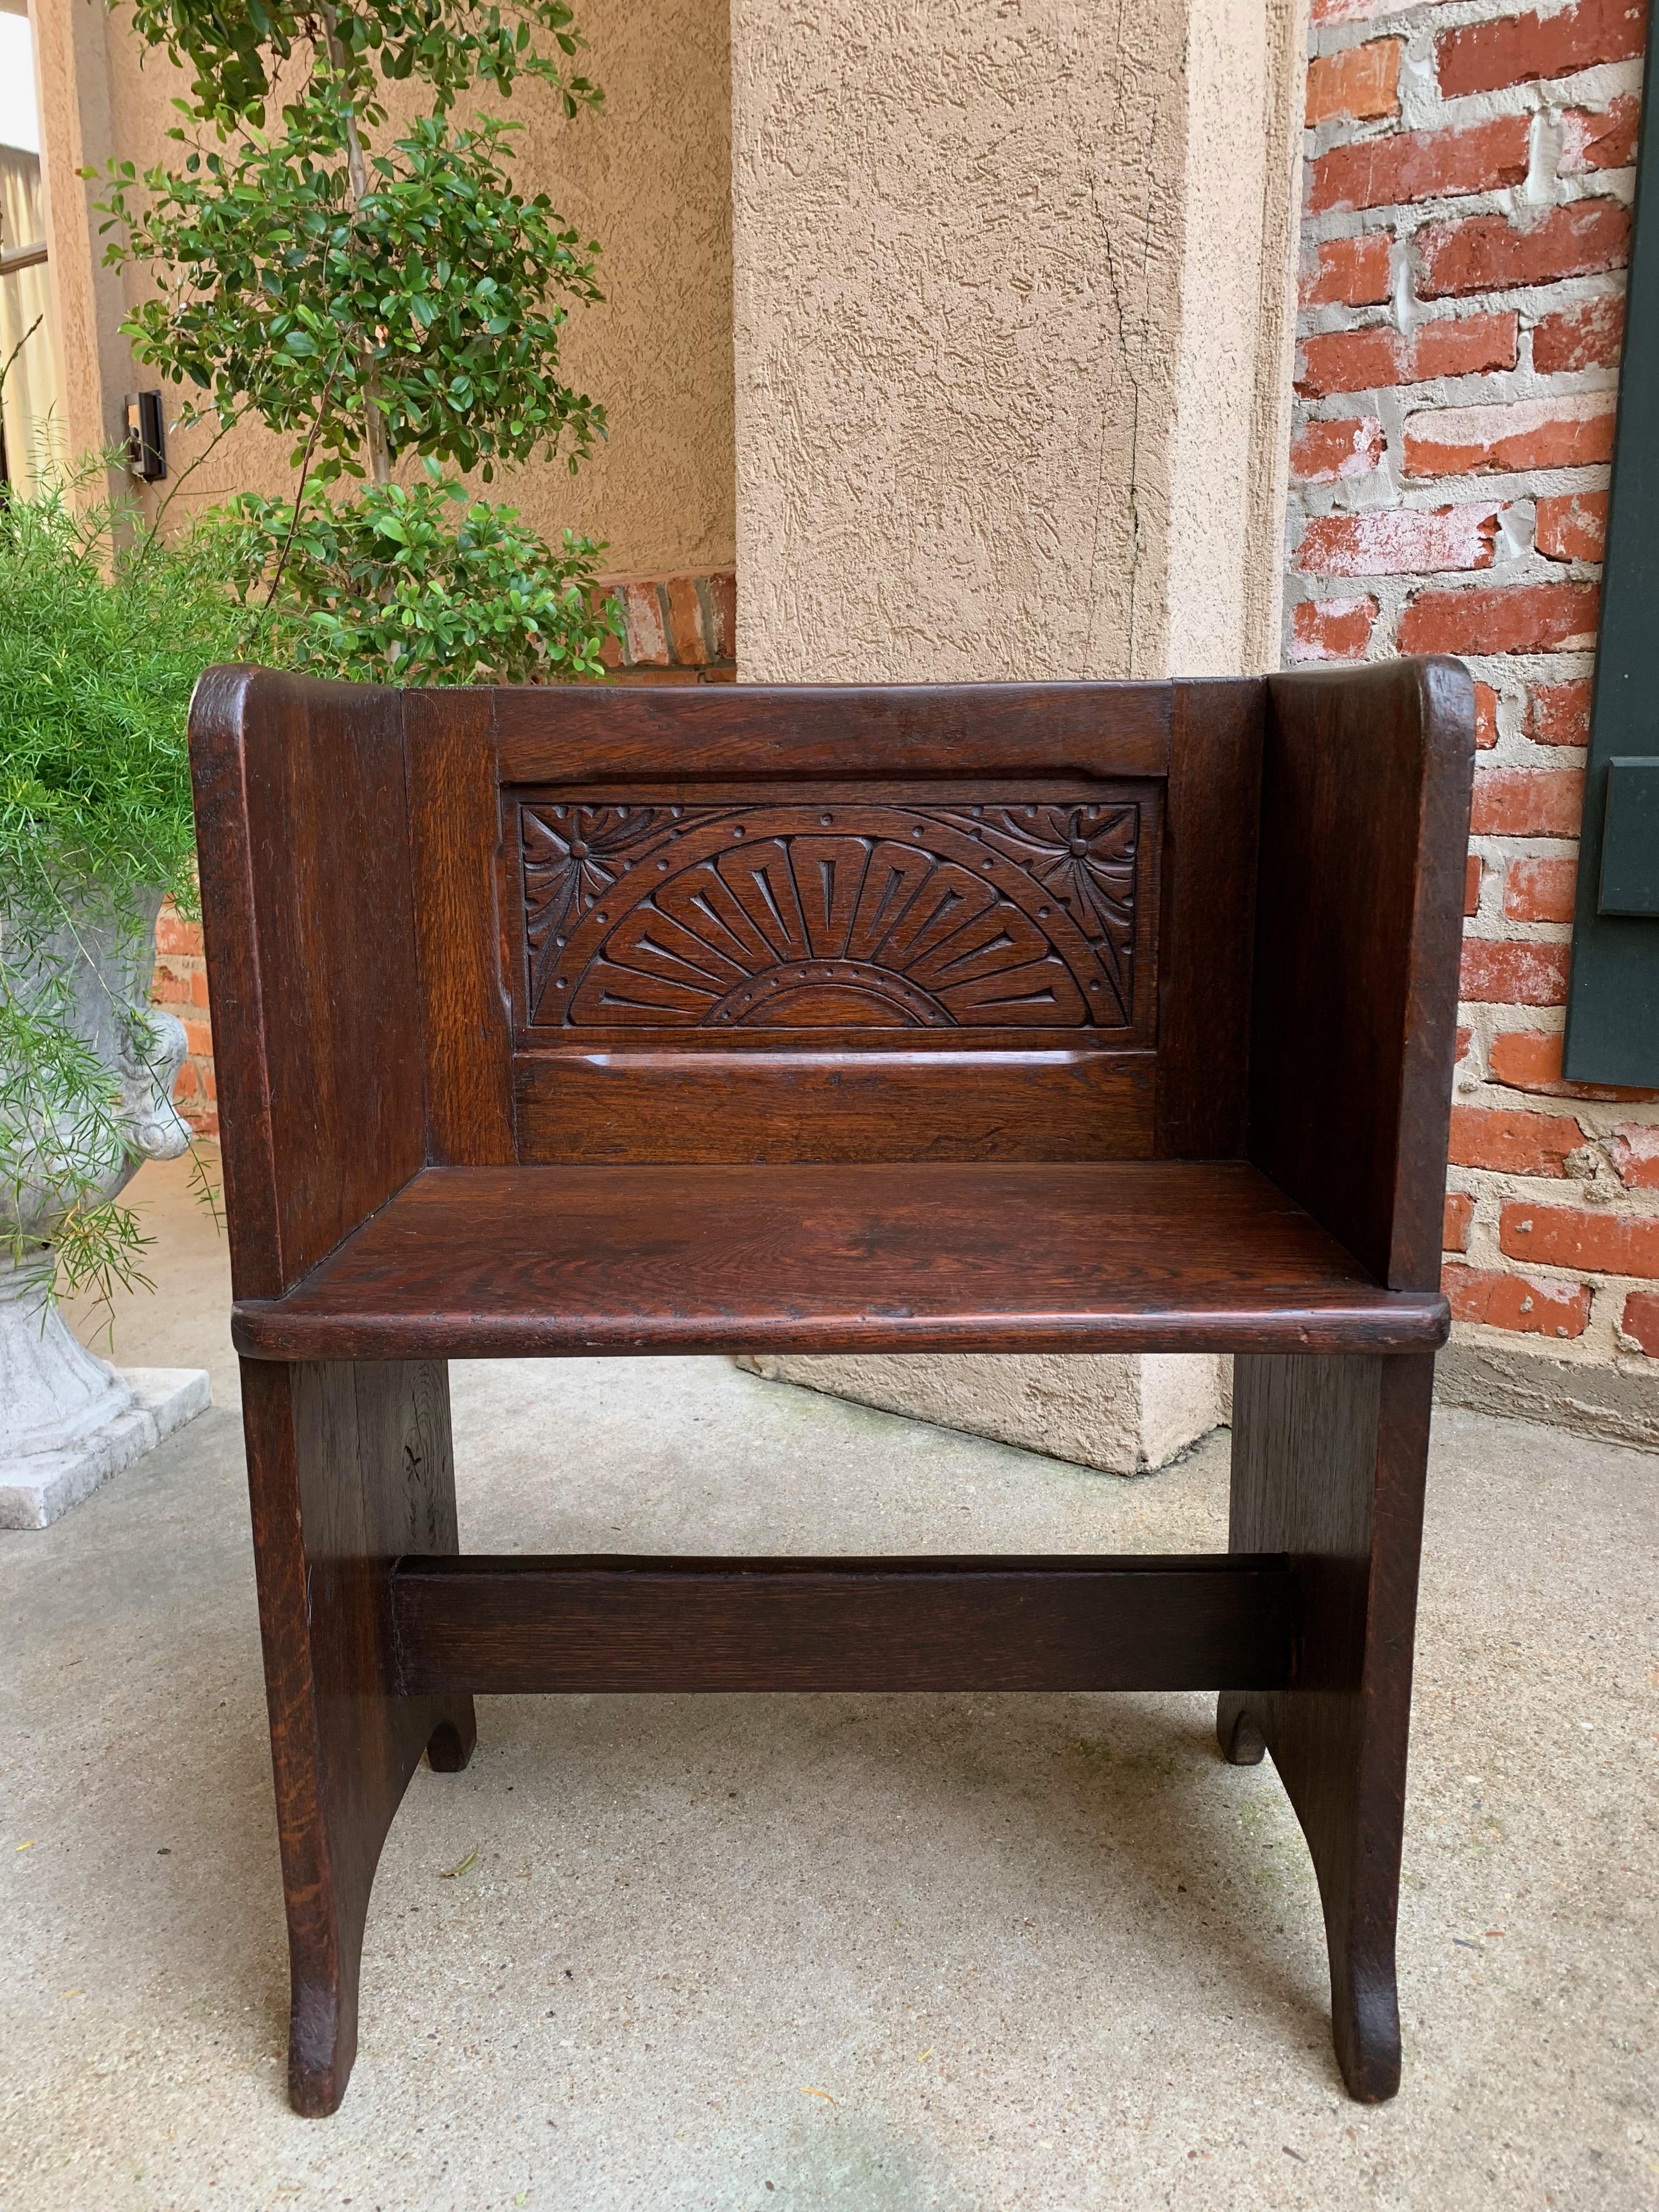 Direct from England, a charming little antique English oak bench!
I imagine it was lovingly hand constructed and carved for some special child (if only it could “talk” and tell us the story)!!
~ Beautiful accent piece
~ Heavy, solid oak,
~ circa